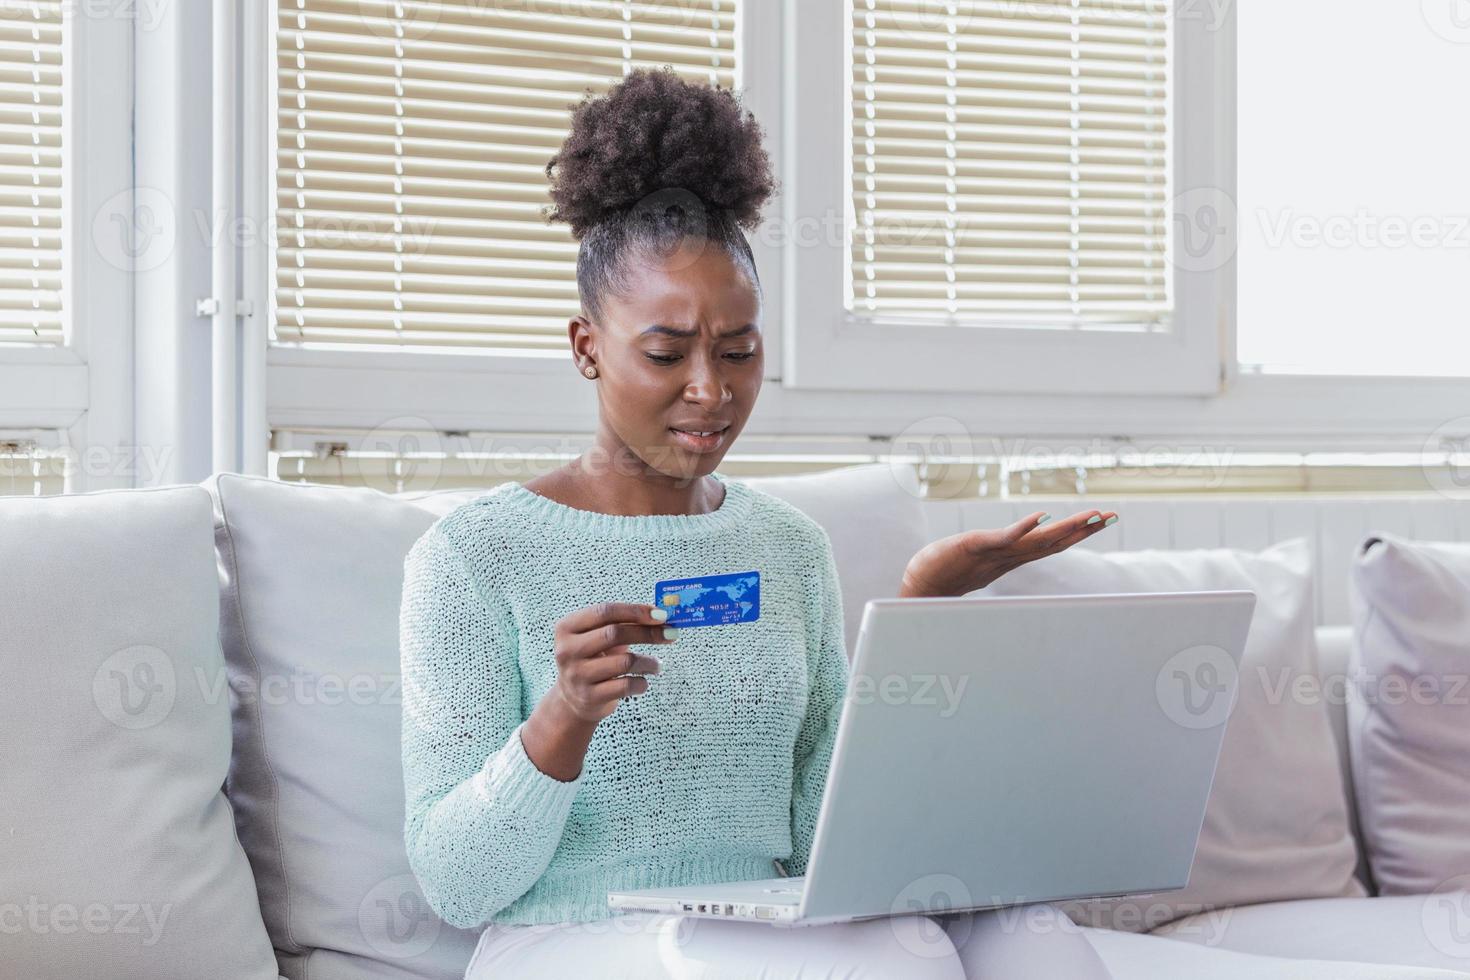 Confused young woman having problem with blocked credit card making rejected unsecure online payment using laptop at home, invalid expired account, transaction failed, money withdraw impossible, debt photo